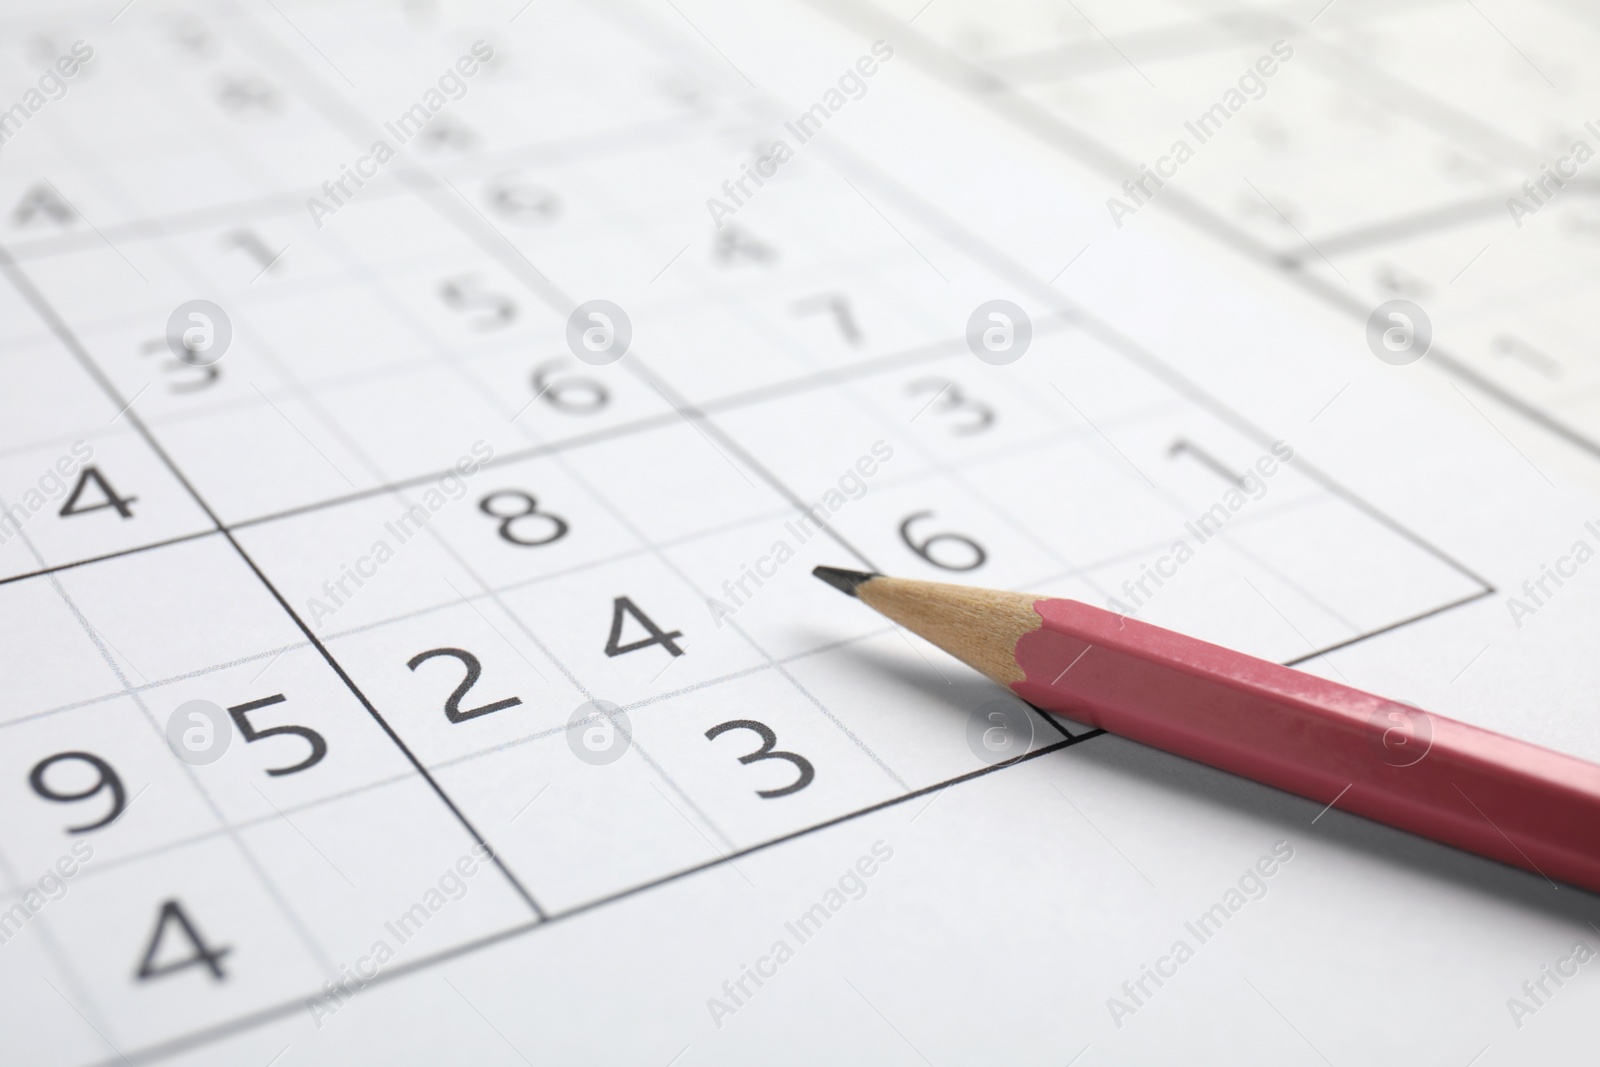 Photo of Sudoku puzzle grid and pencil, closeup view